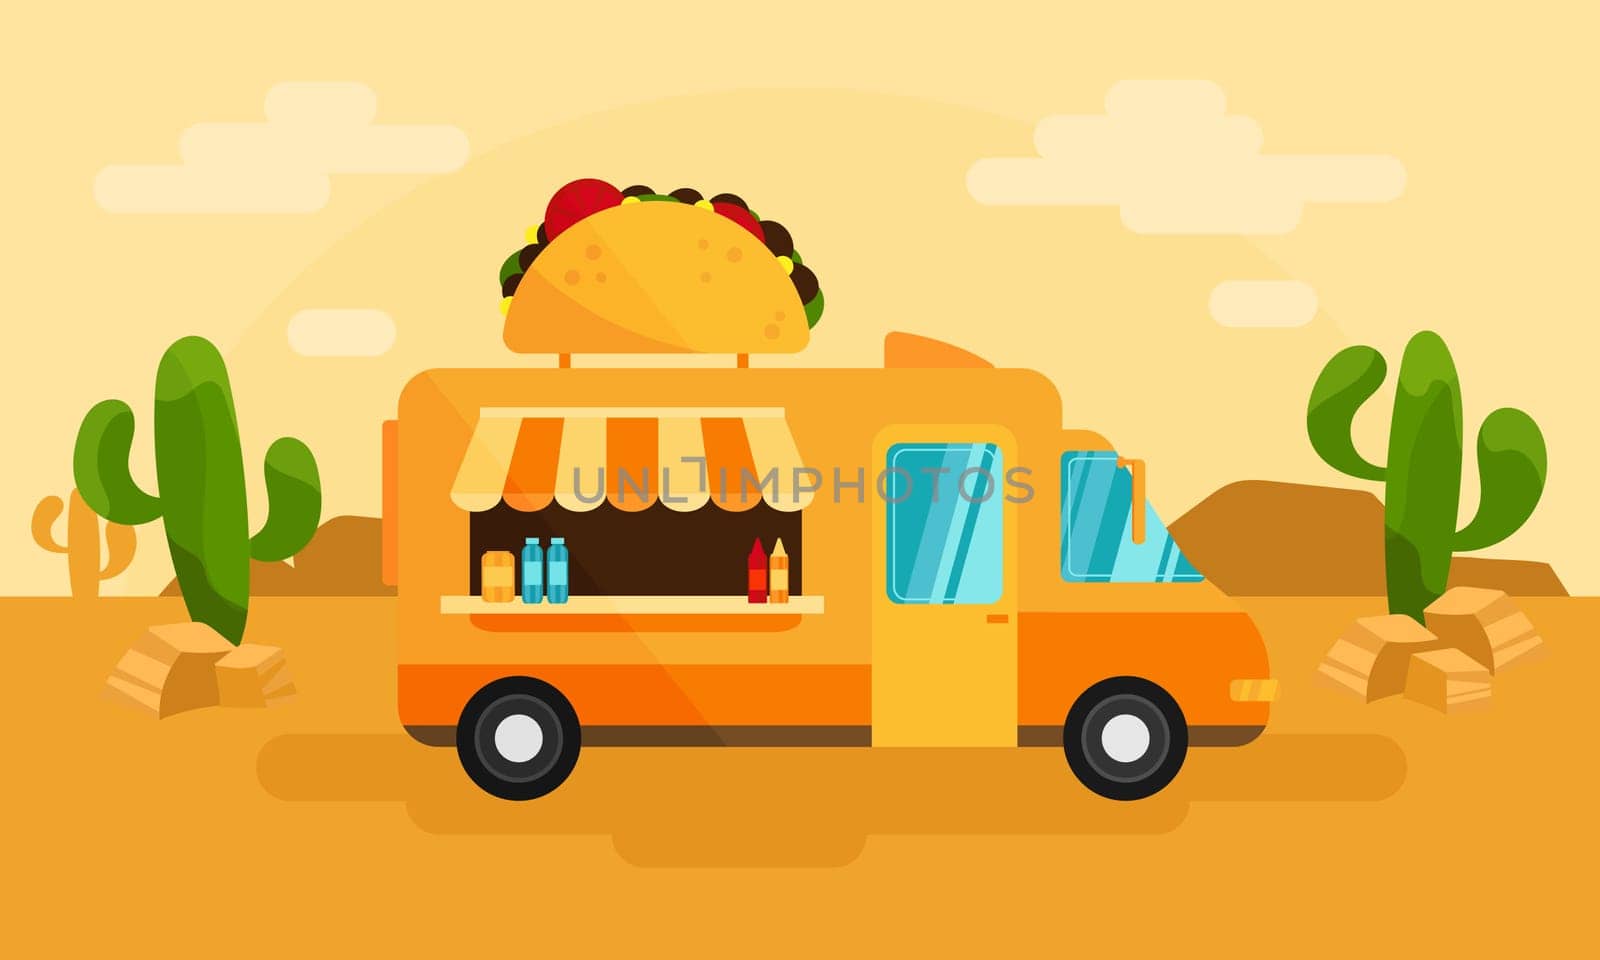 Food truck or Mexican food meal. Landscape with cactus, desert background by natali_brill